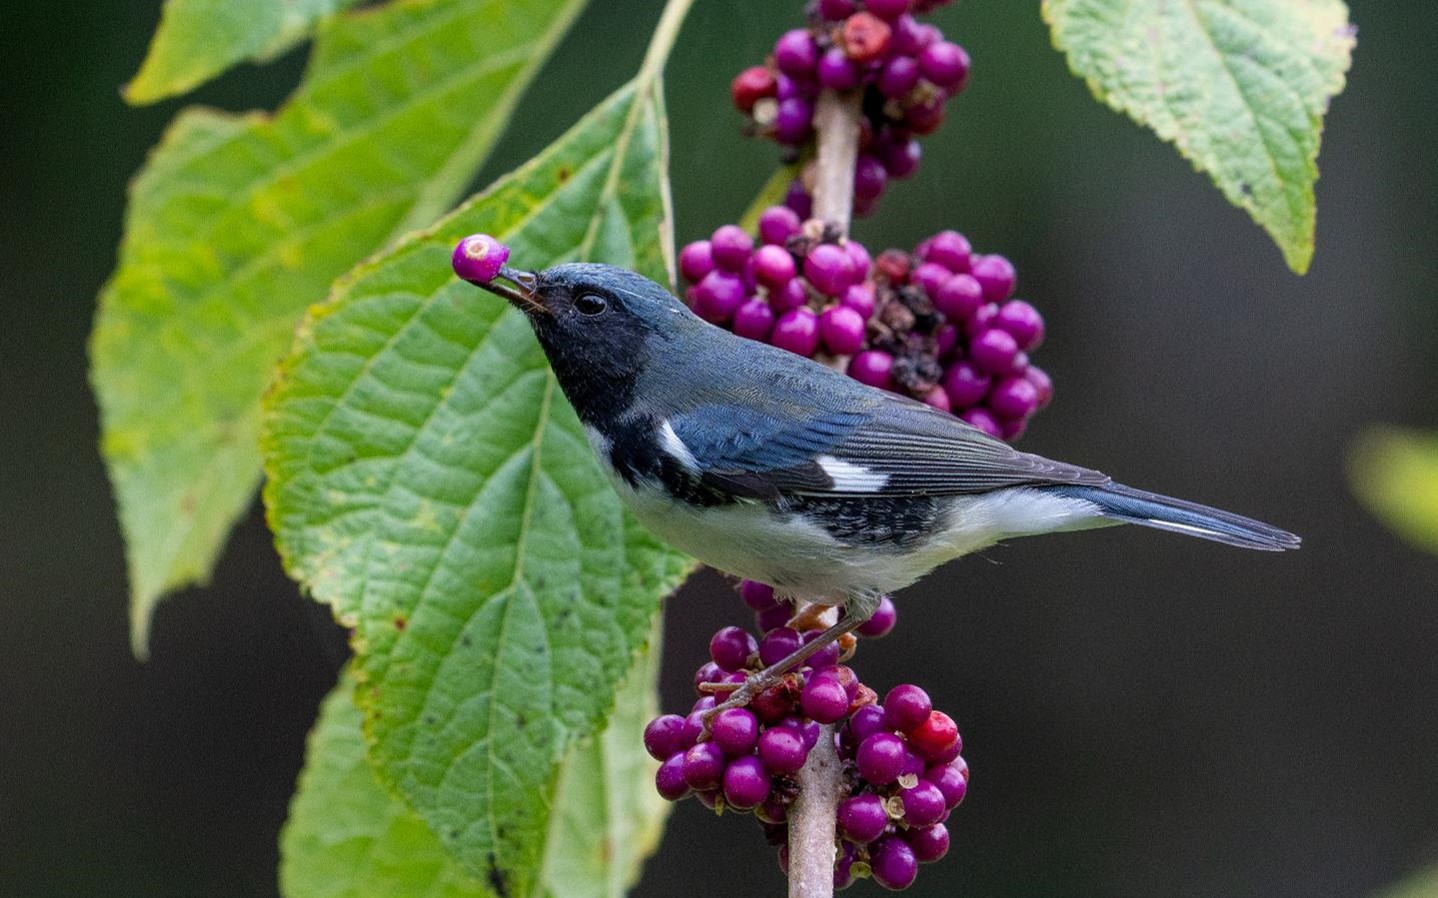 "Two Beauties-Black-throated Blue Warbler on American Beautyberry" Novice 2nd Place: Bill Hauck, Winter Park